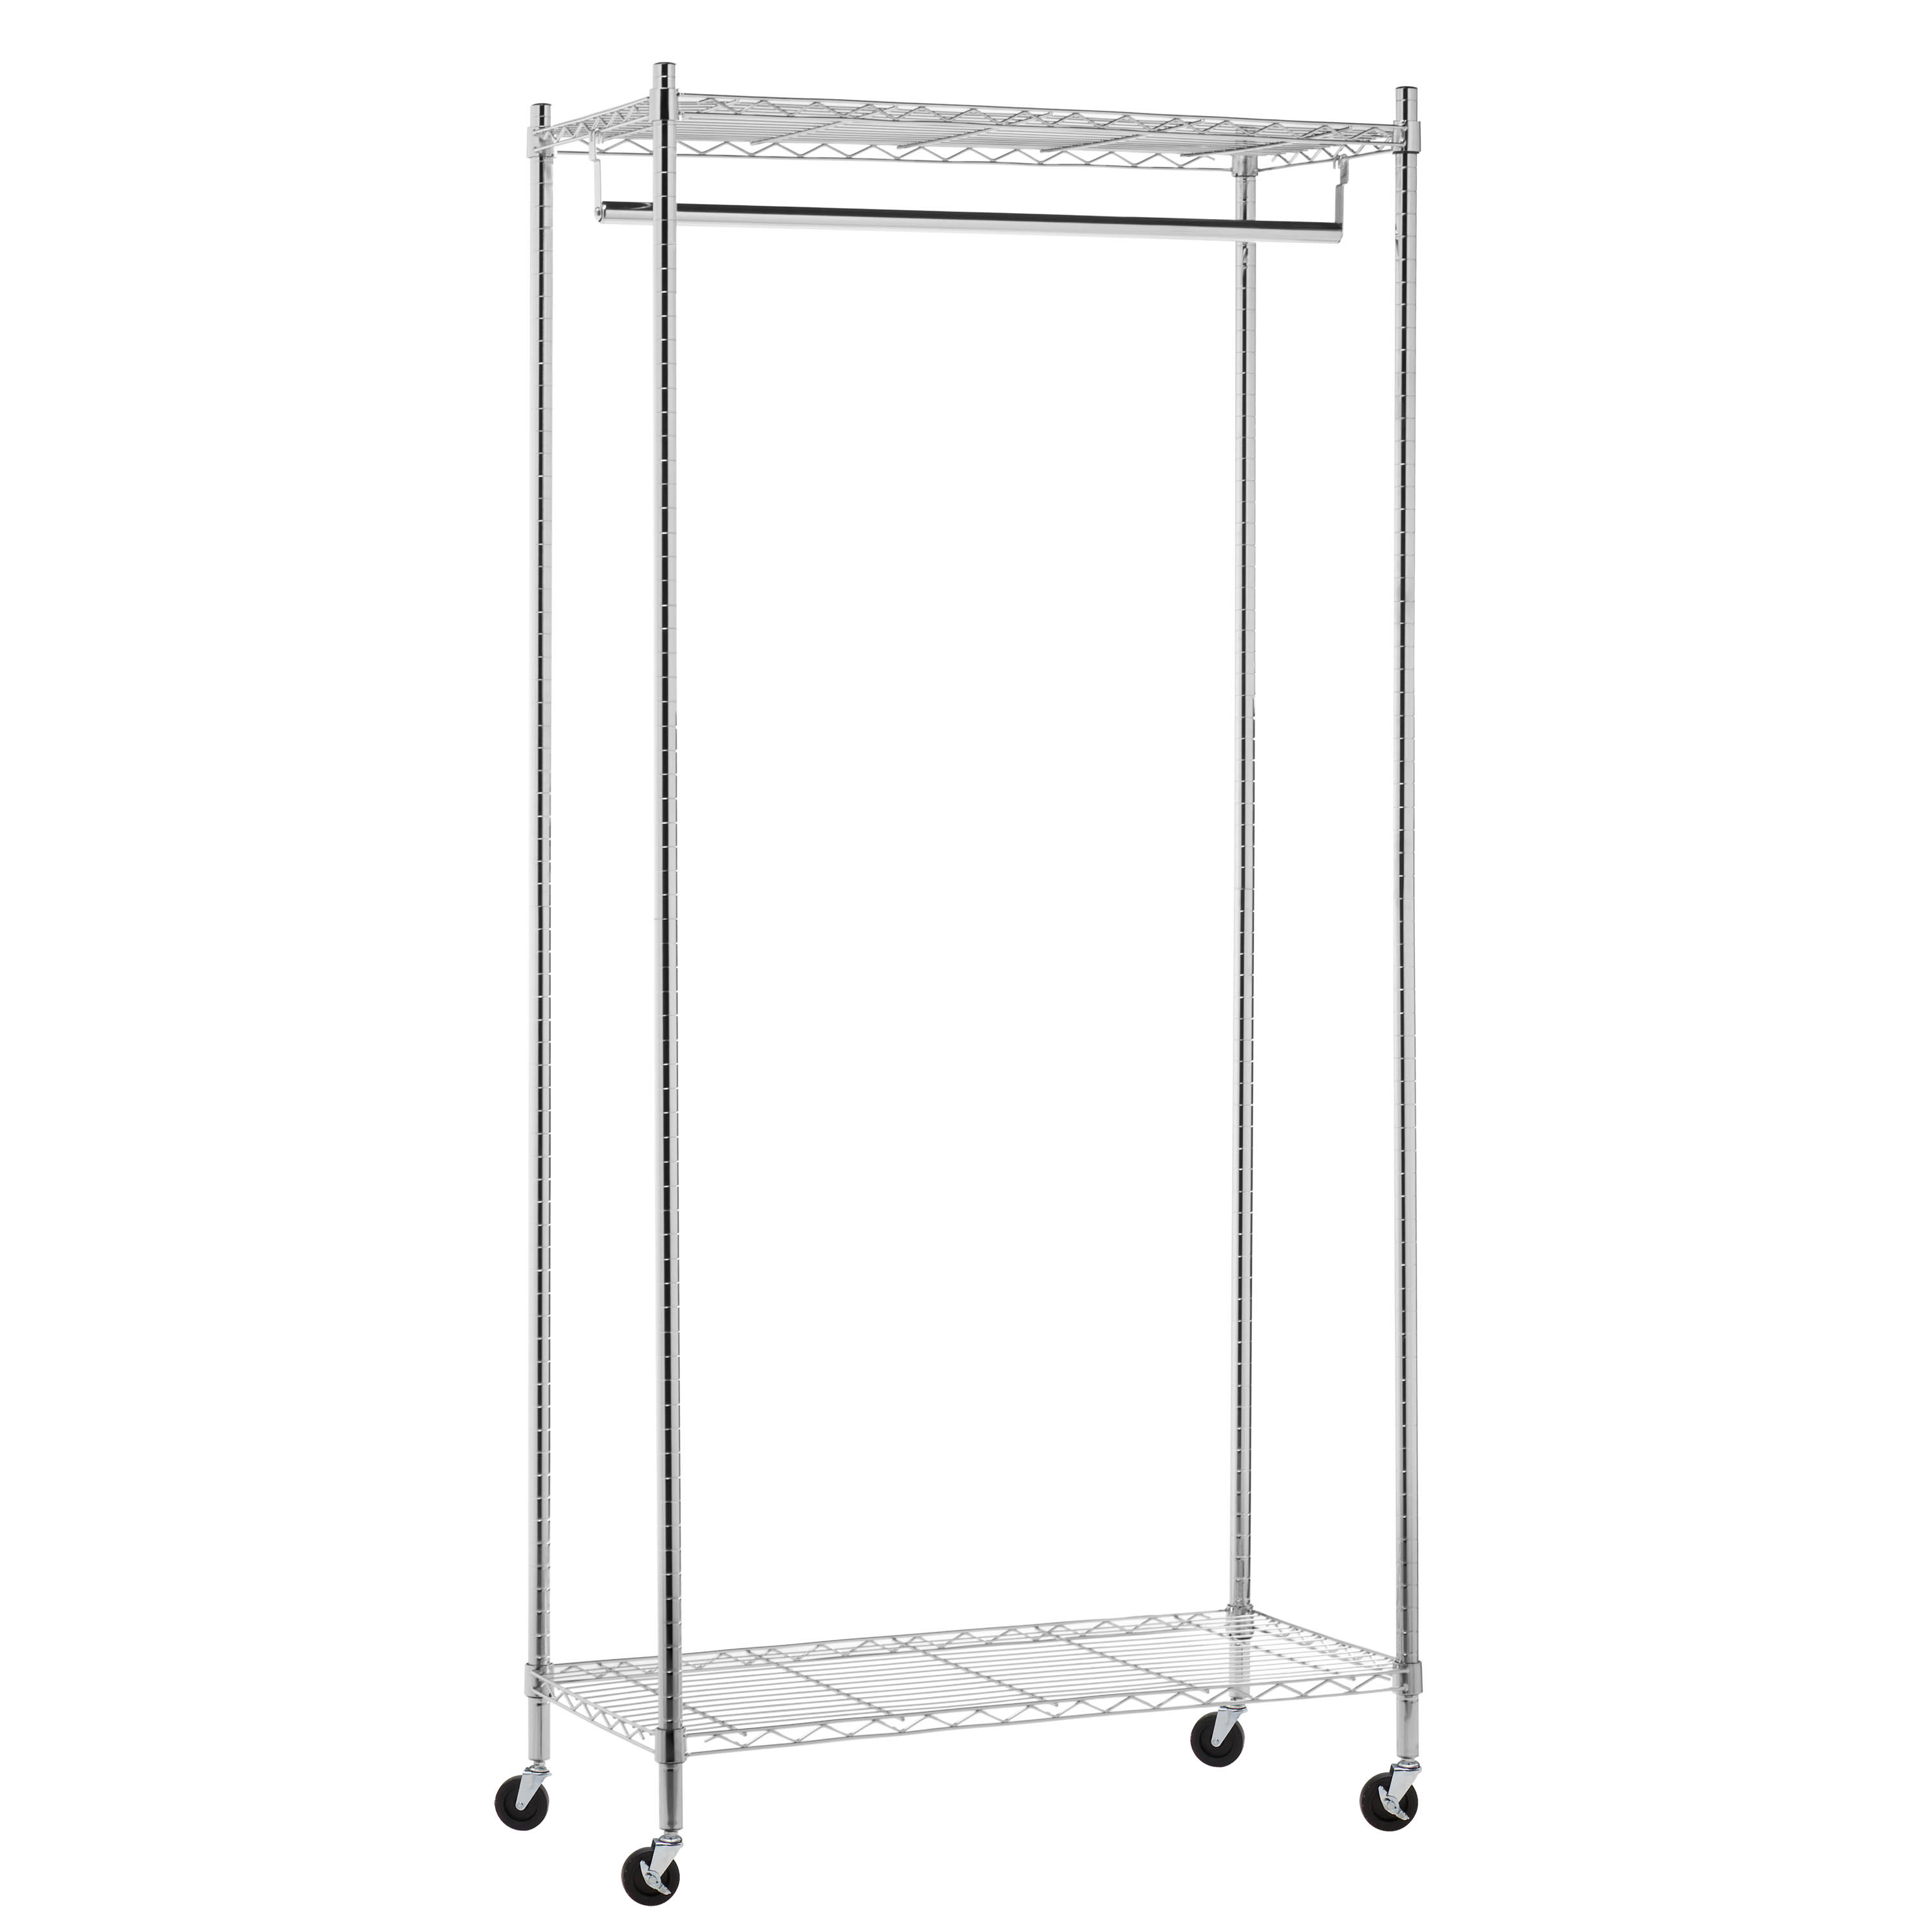 Honey-Can-Do Steel Heavy Duty Rolling Clothes Rack with 2 Shelves, Chrome - image 5 of 10